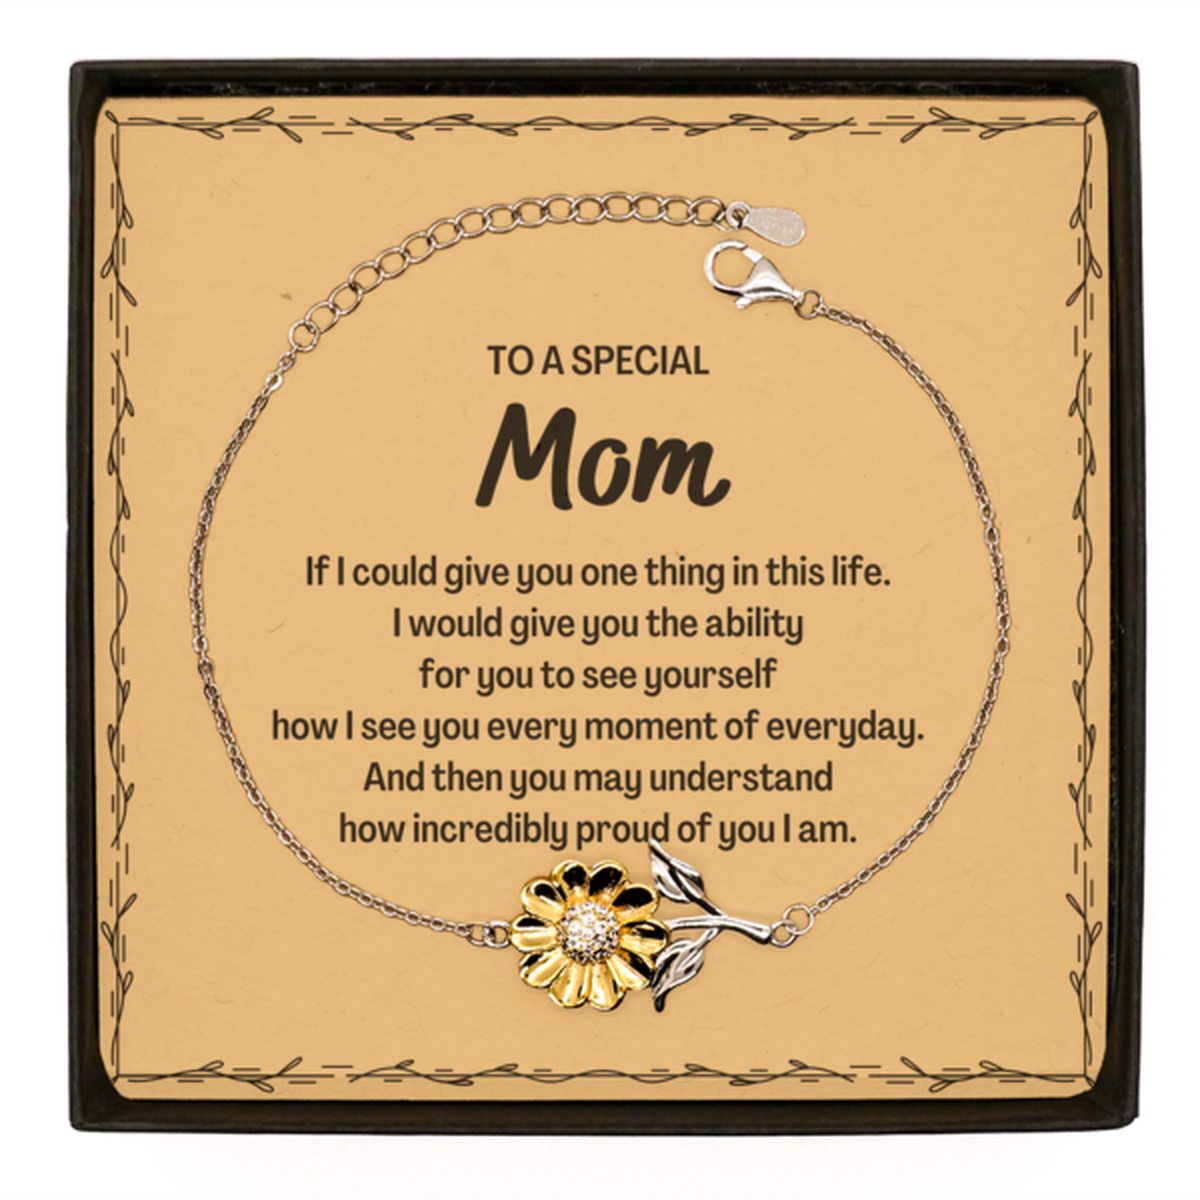 To My Mom Sunflower Bracelet, Gifts For Mom Message Card, Inspirational Gifts for Christmas Birthday, Epic Gifts for Mom To A Special Mom how incredibly proud of you I am